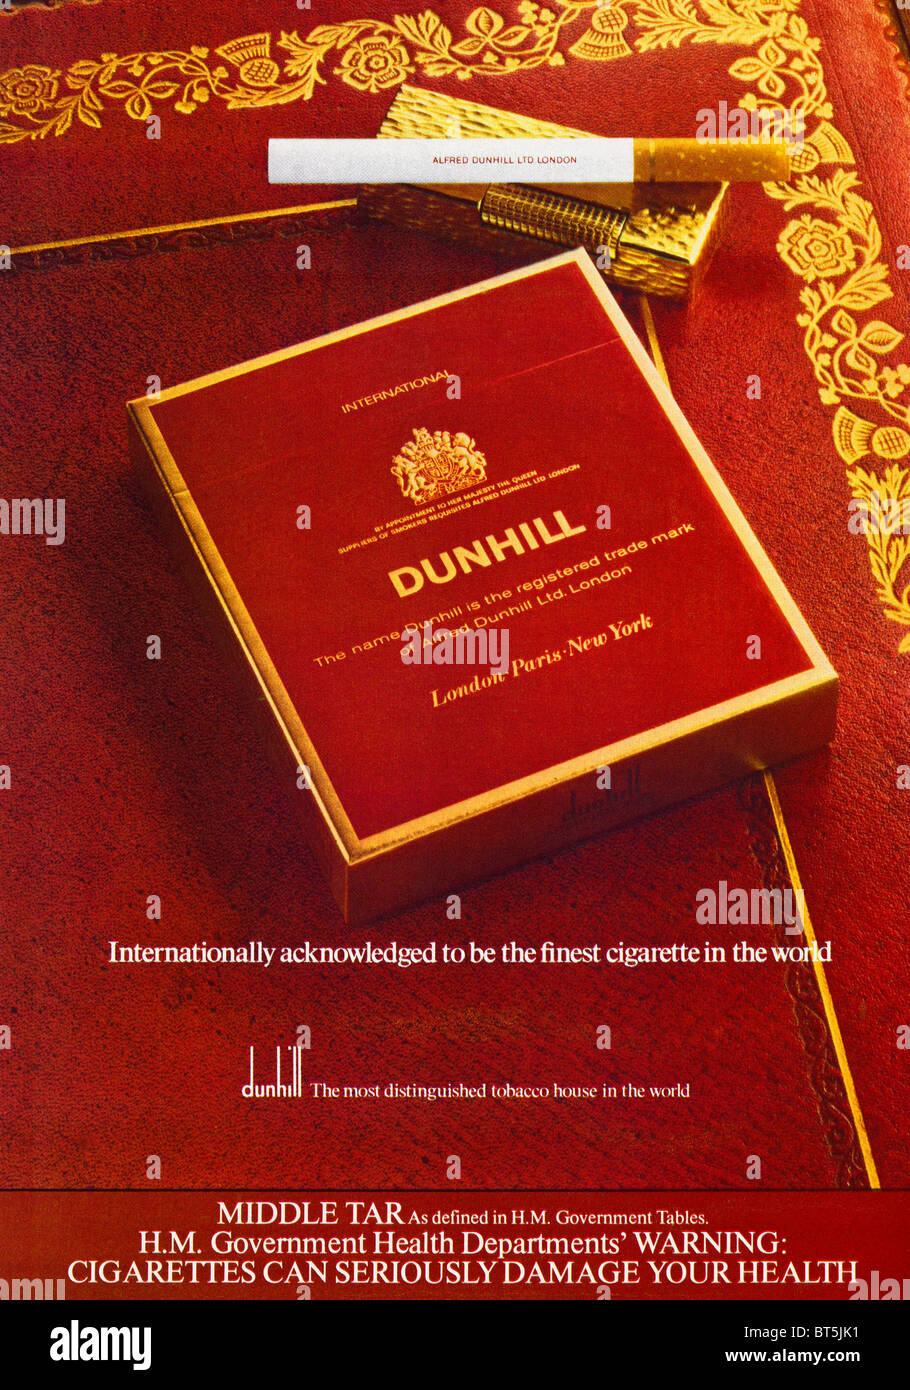 Advert for Dunhill cigarettes in magazine dated September 1979 Stock Photo